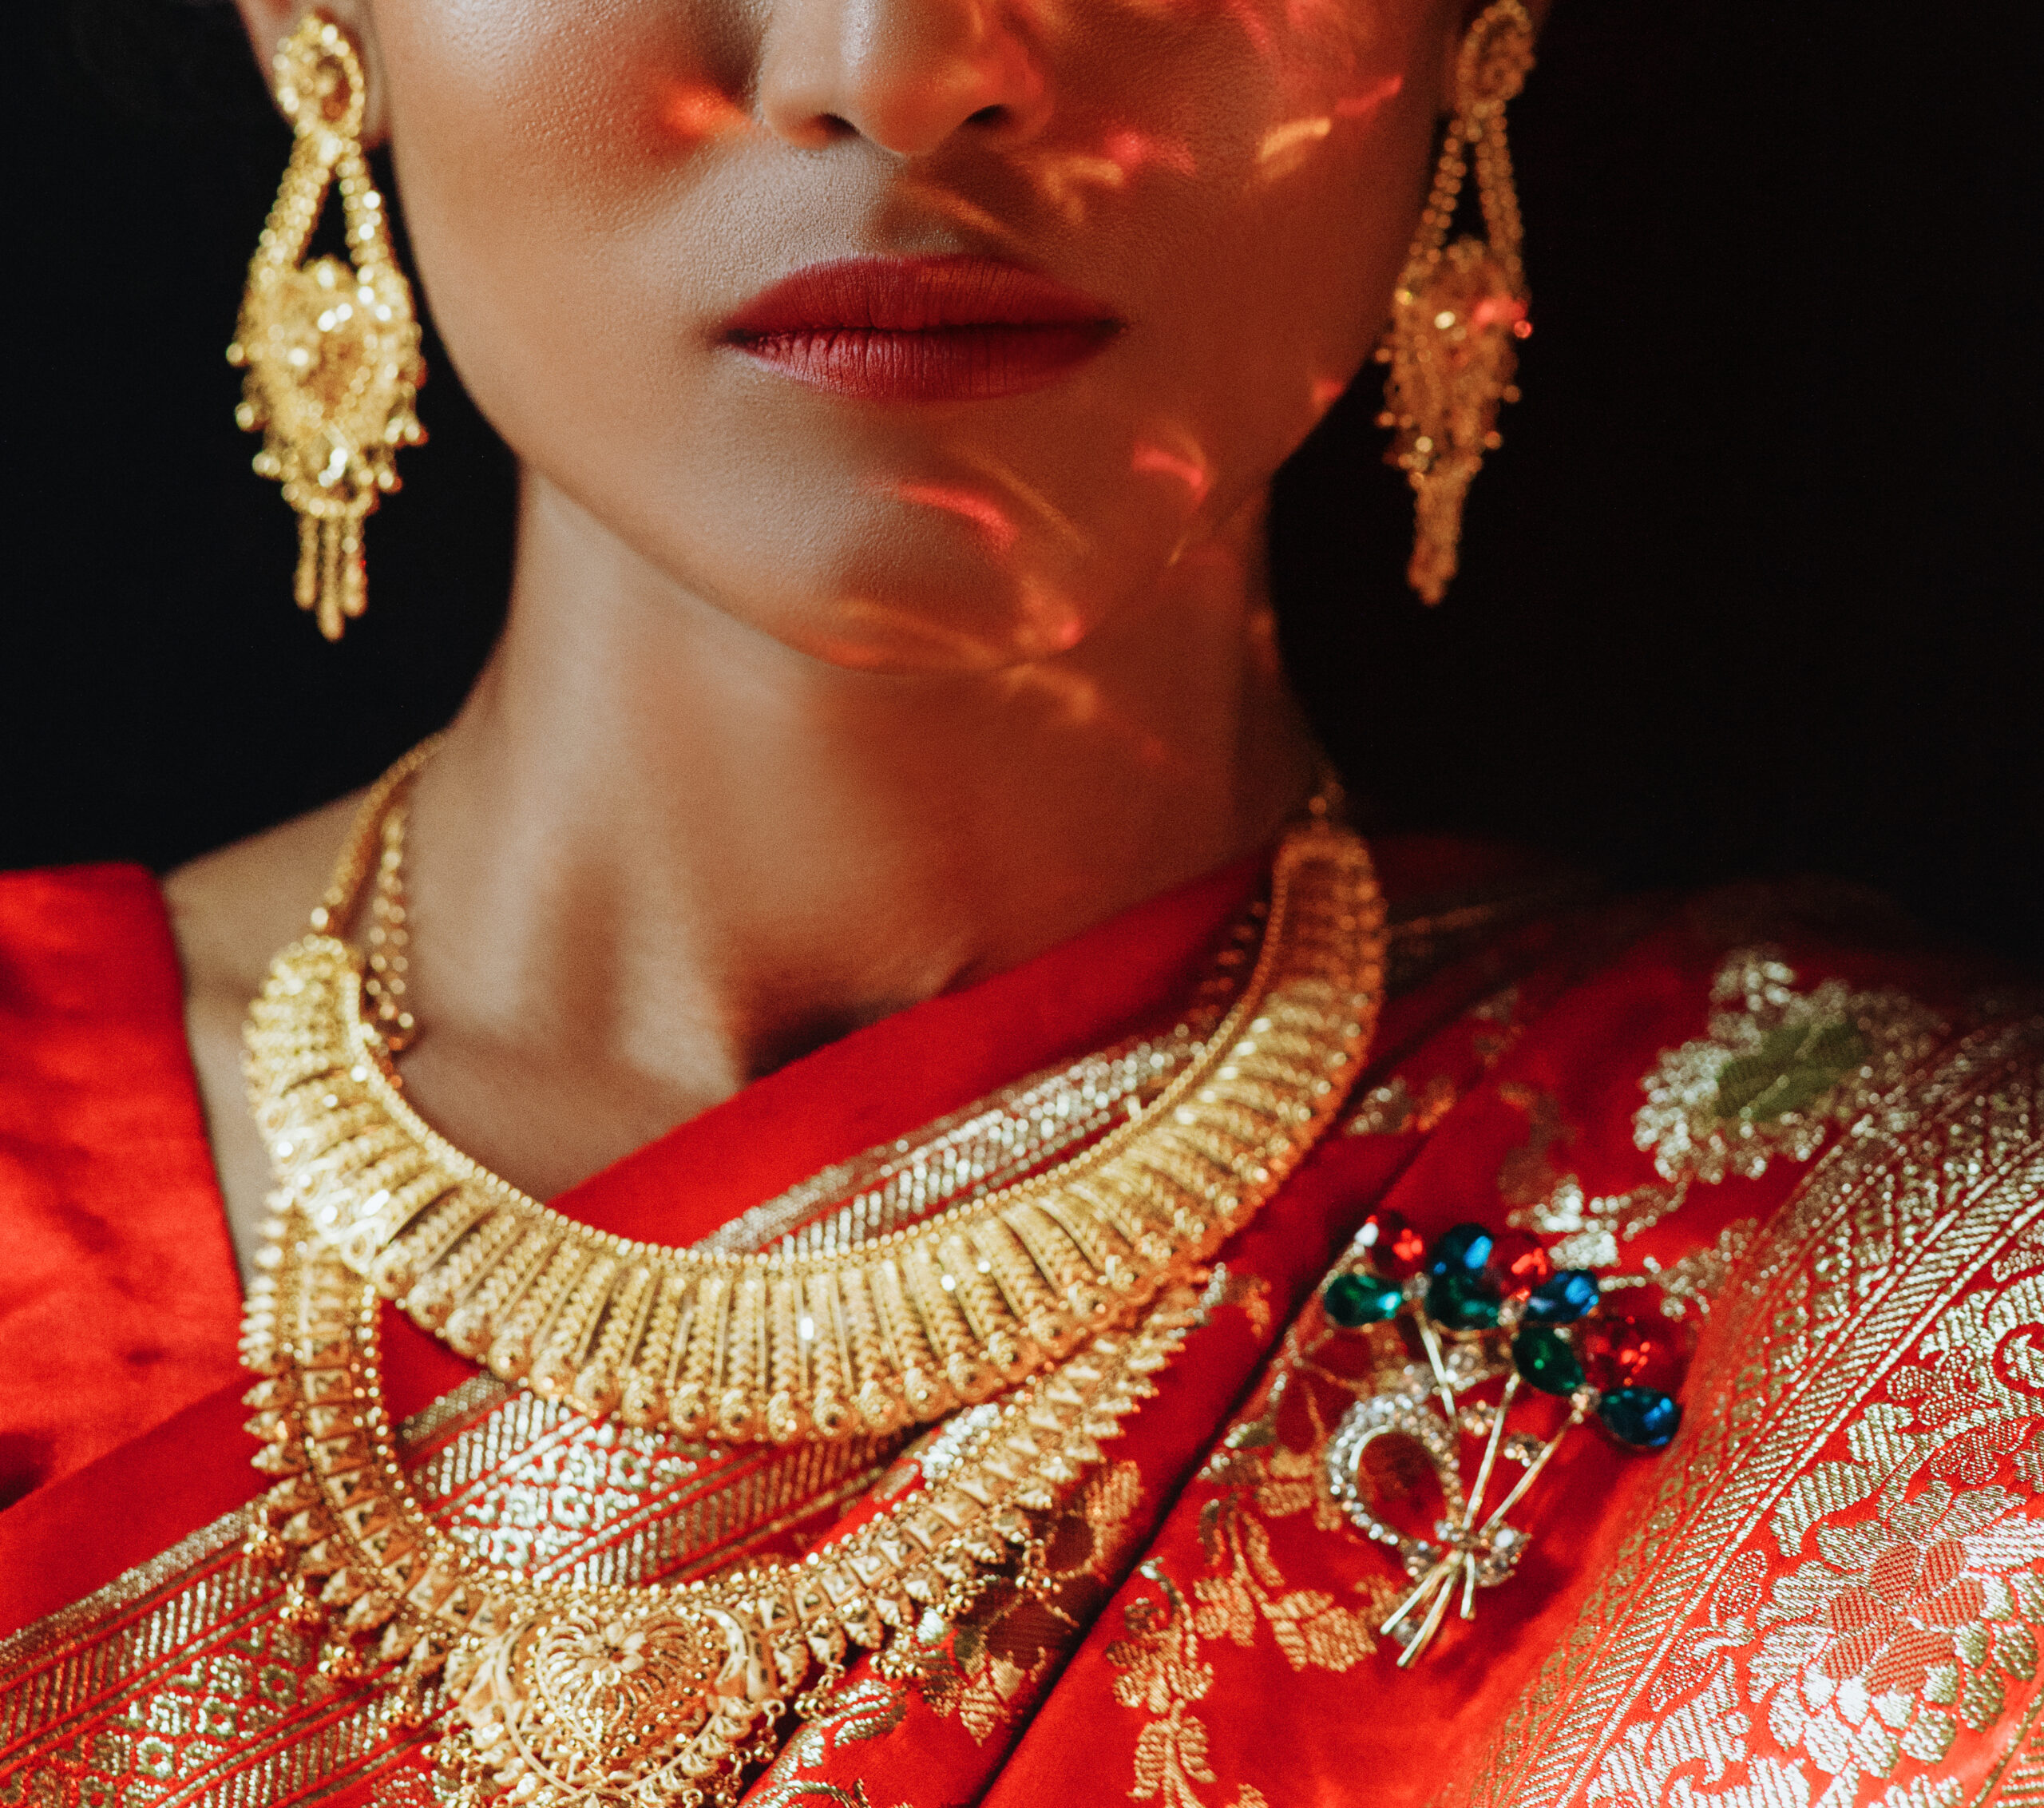 Portrait of Hindu bride in traditional red sari. (Image Source: Free Photo | Free photo portrait of hindu bride in traditional red sari.